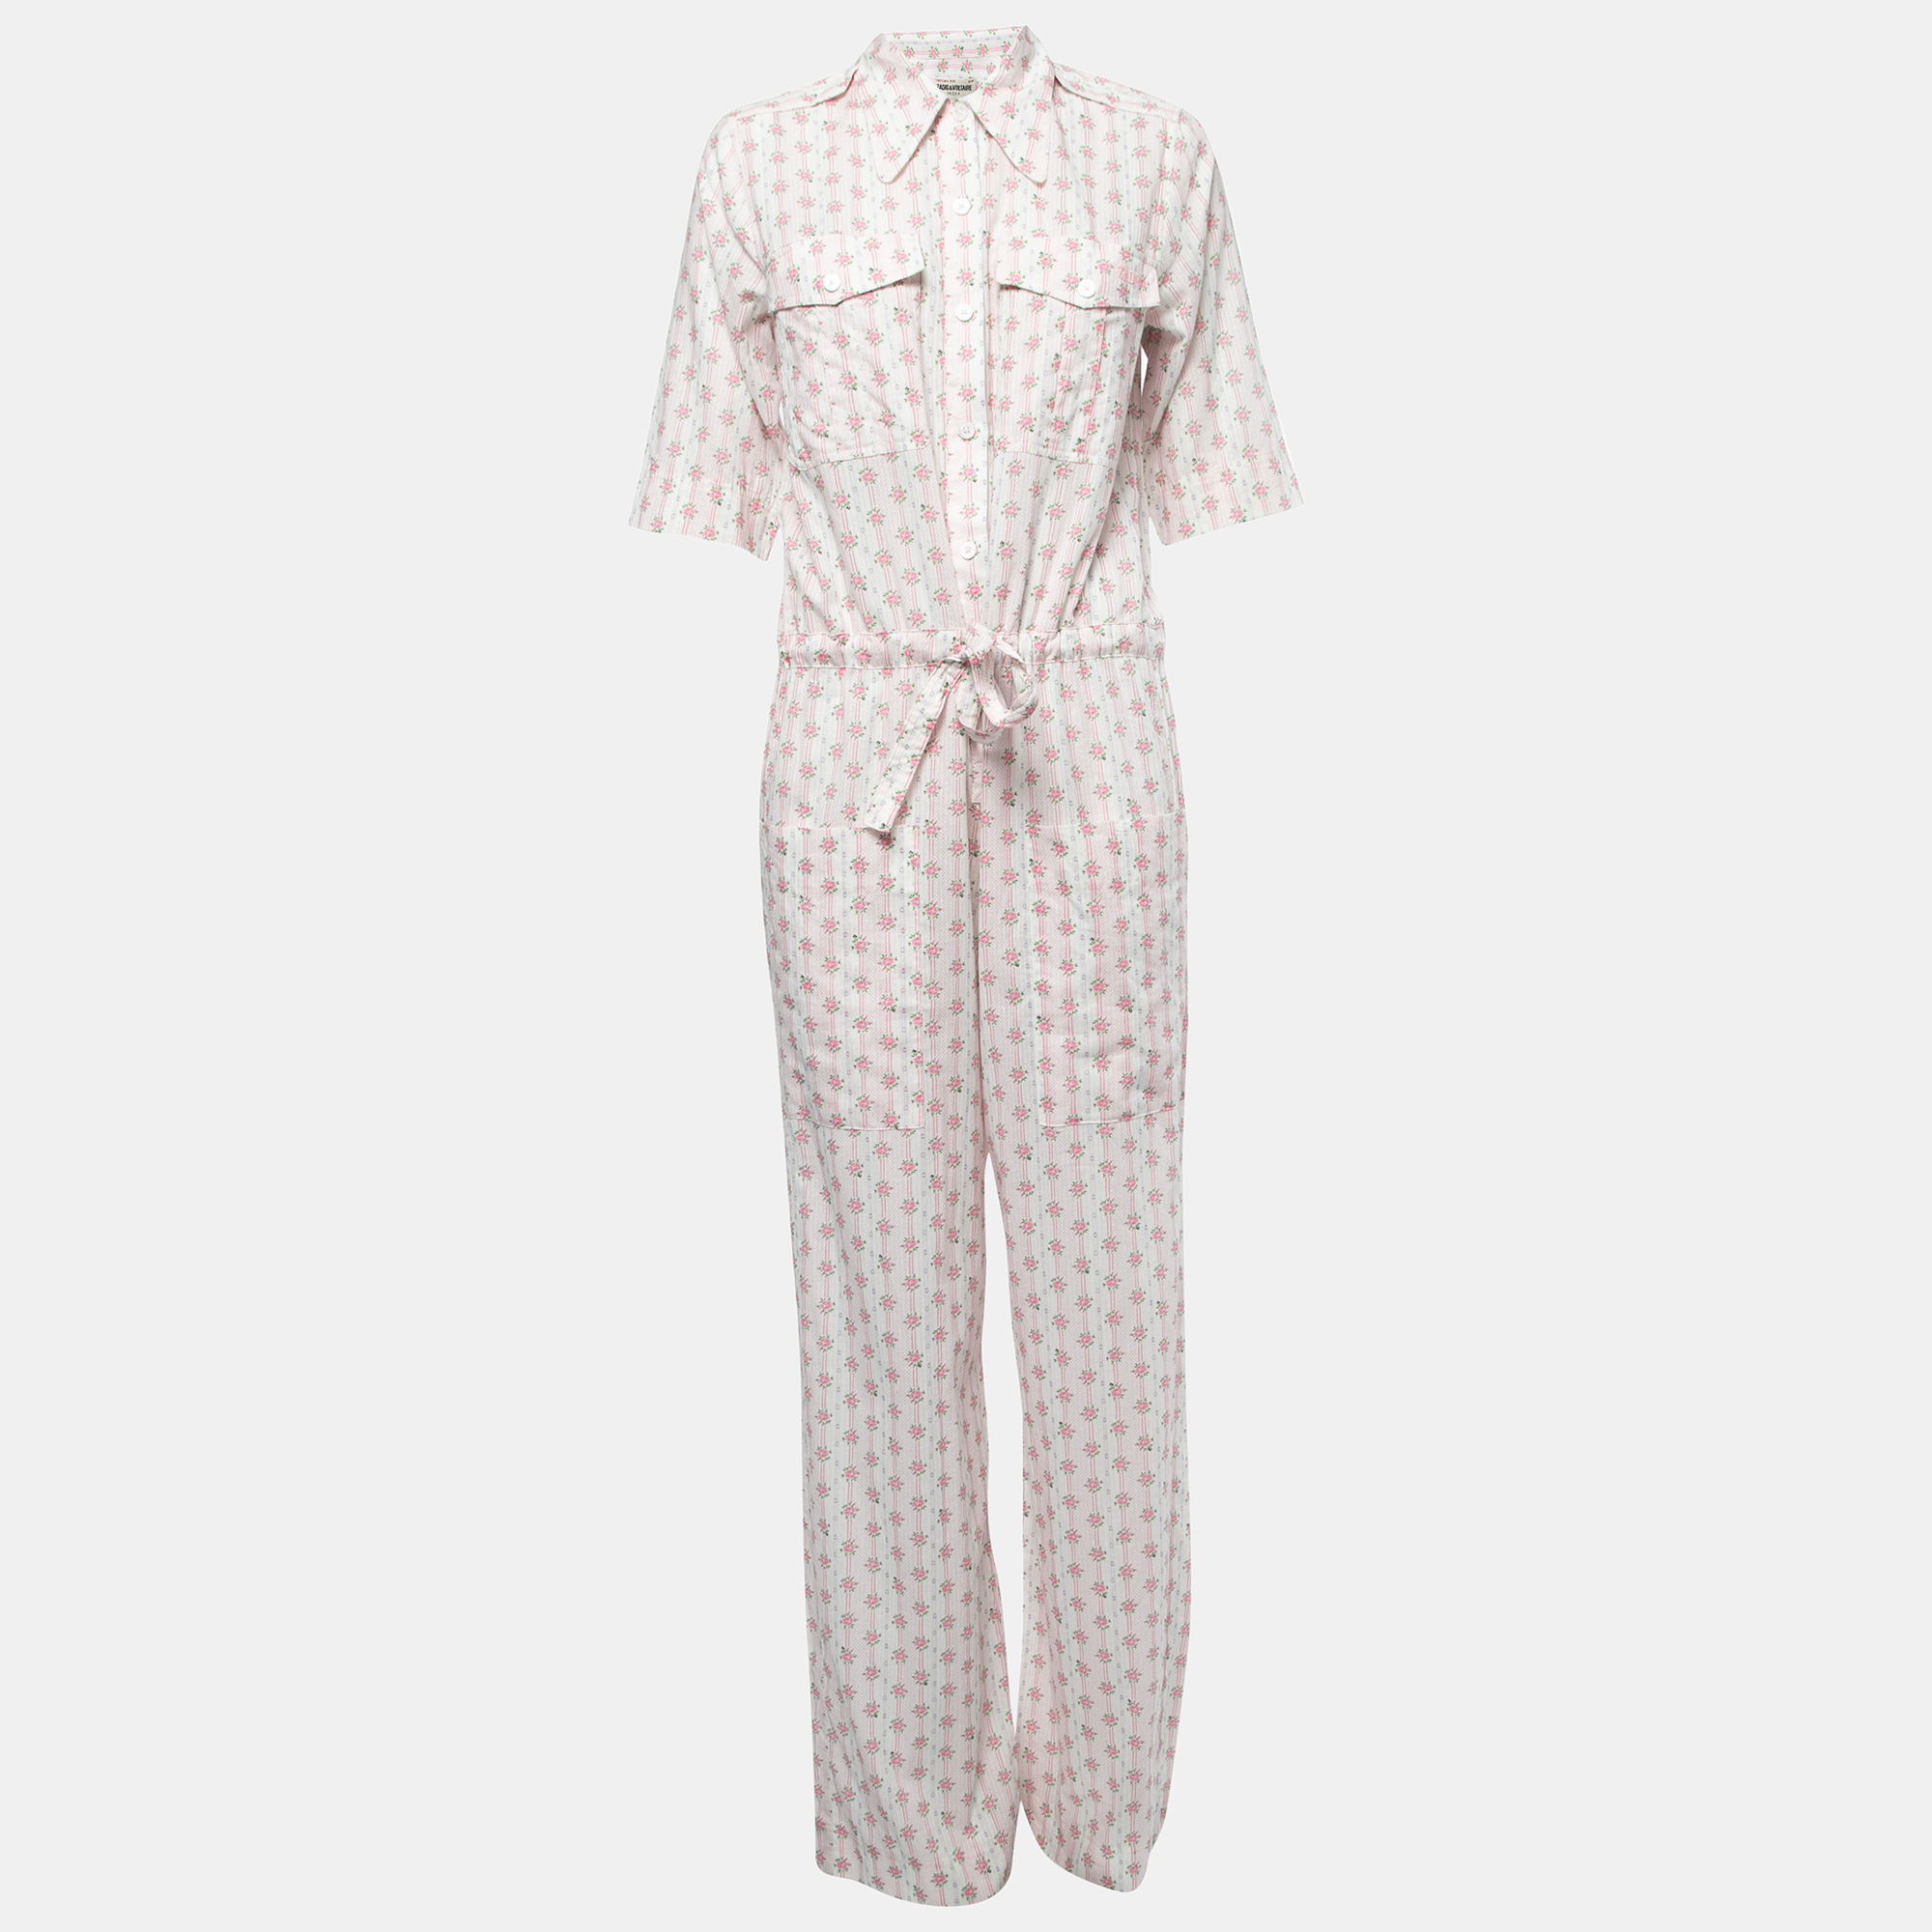 Zadig & Voltaire White Floral Printed Cotton Catsy Jumpsuit M